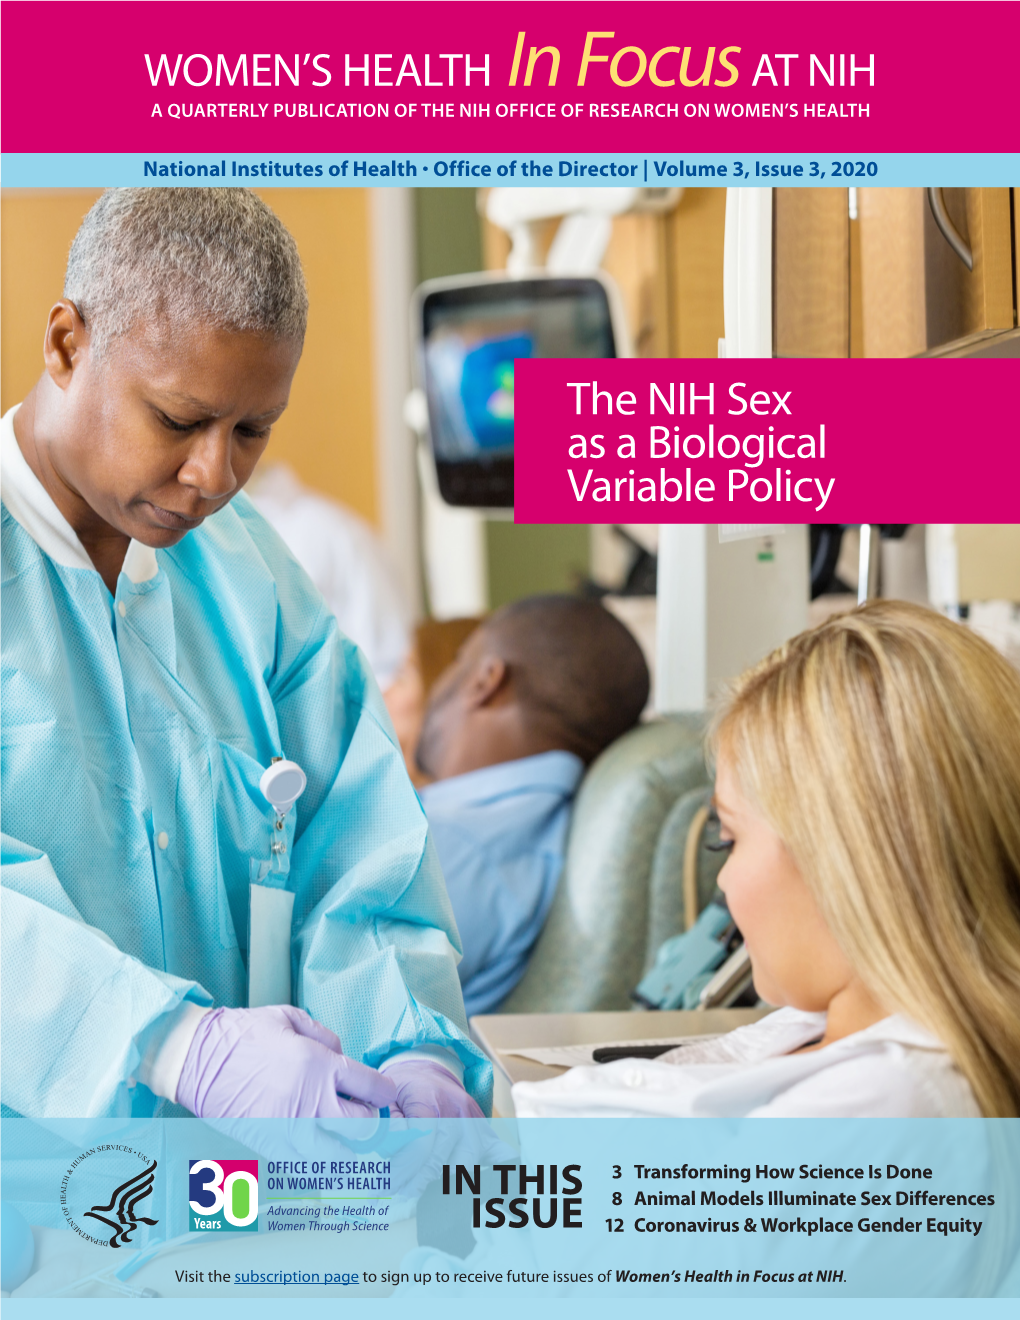 Women's Health in Focus at NIH, Vol. 3, Issue 3